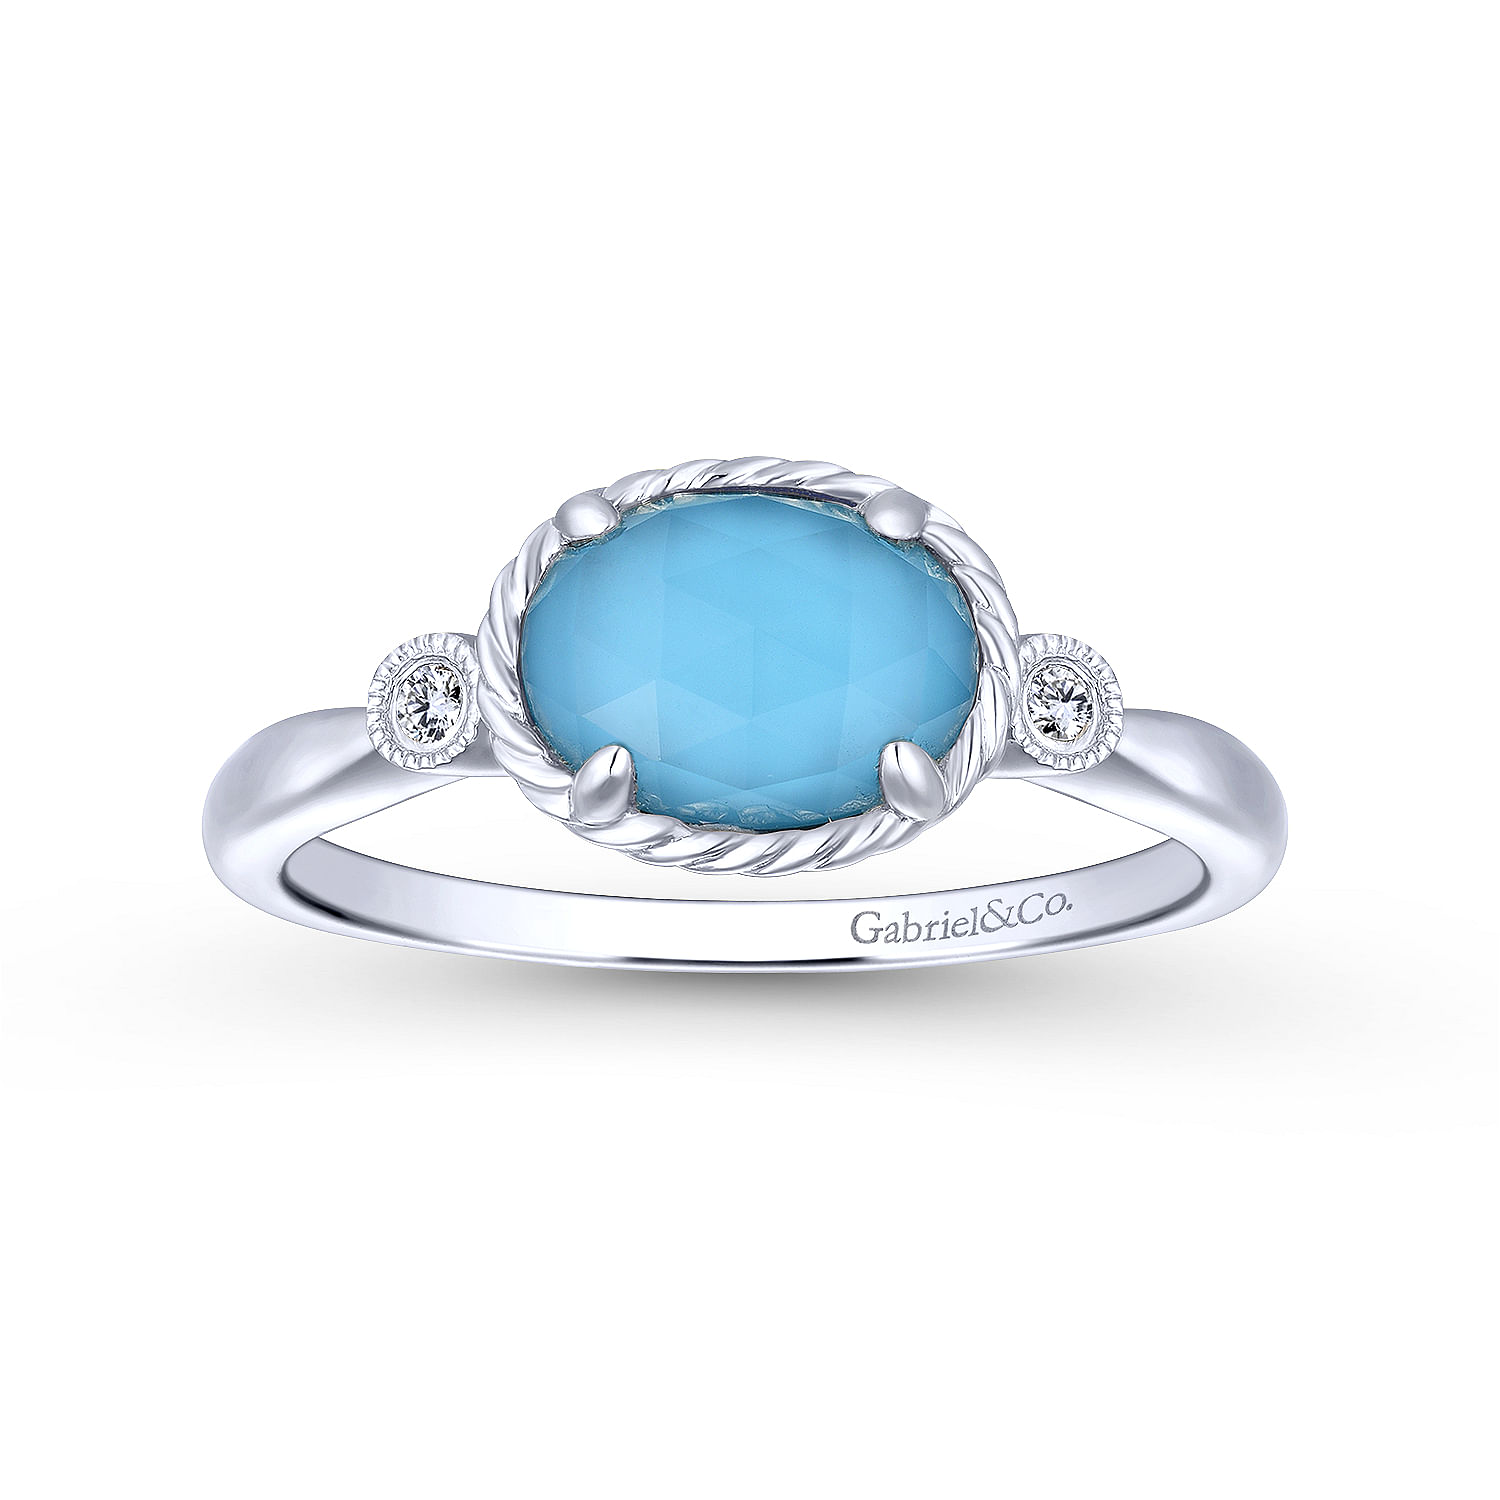 14K White Gold Oval Rock Crystal/Turquoise Diamond Ring